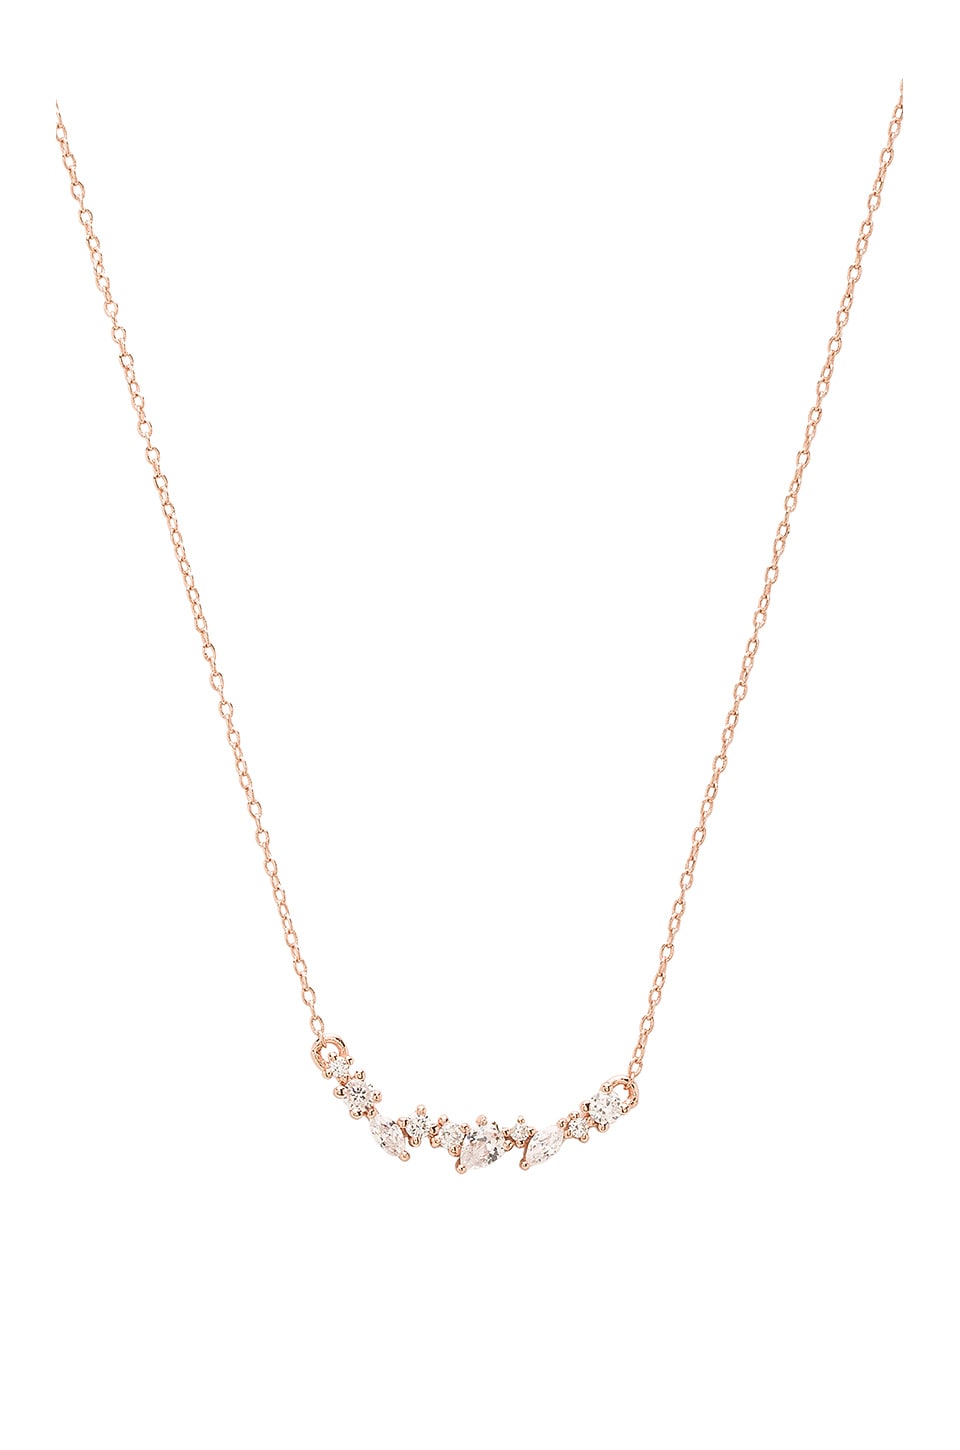 Samantha Wills Gold Dust Nights Necklace in Rose Gold | REVOLVE